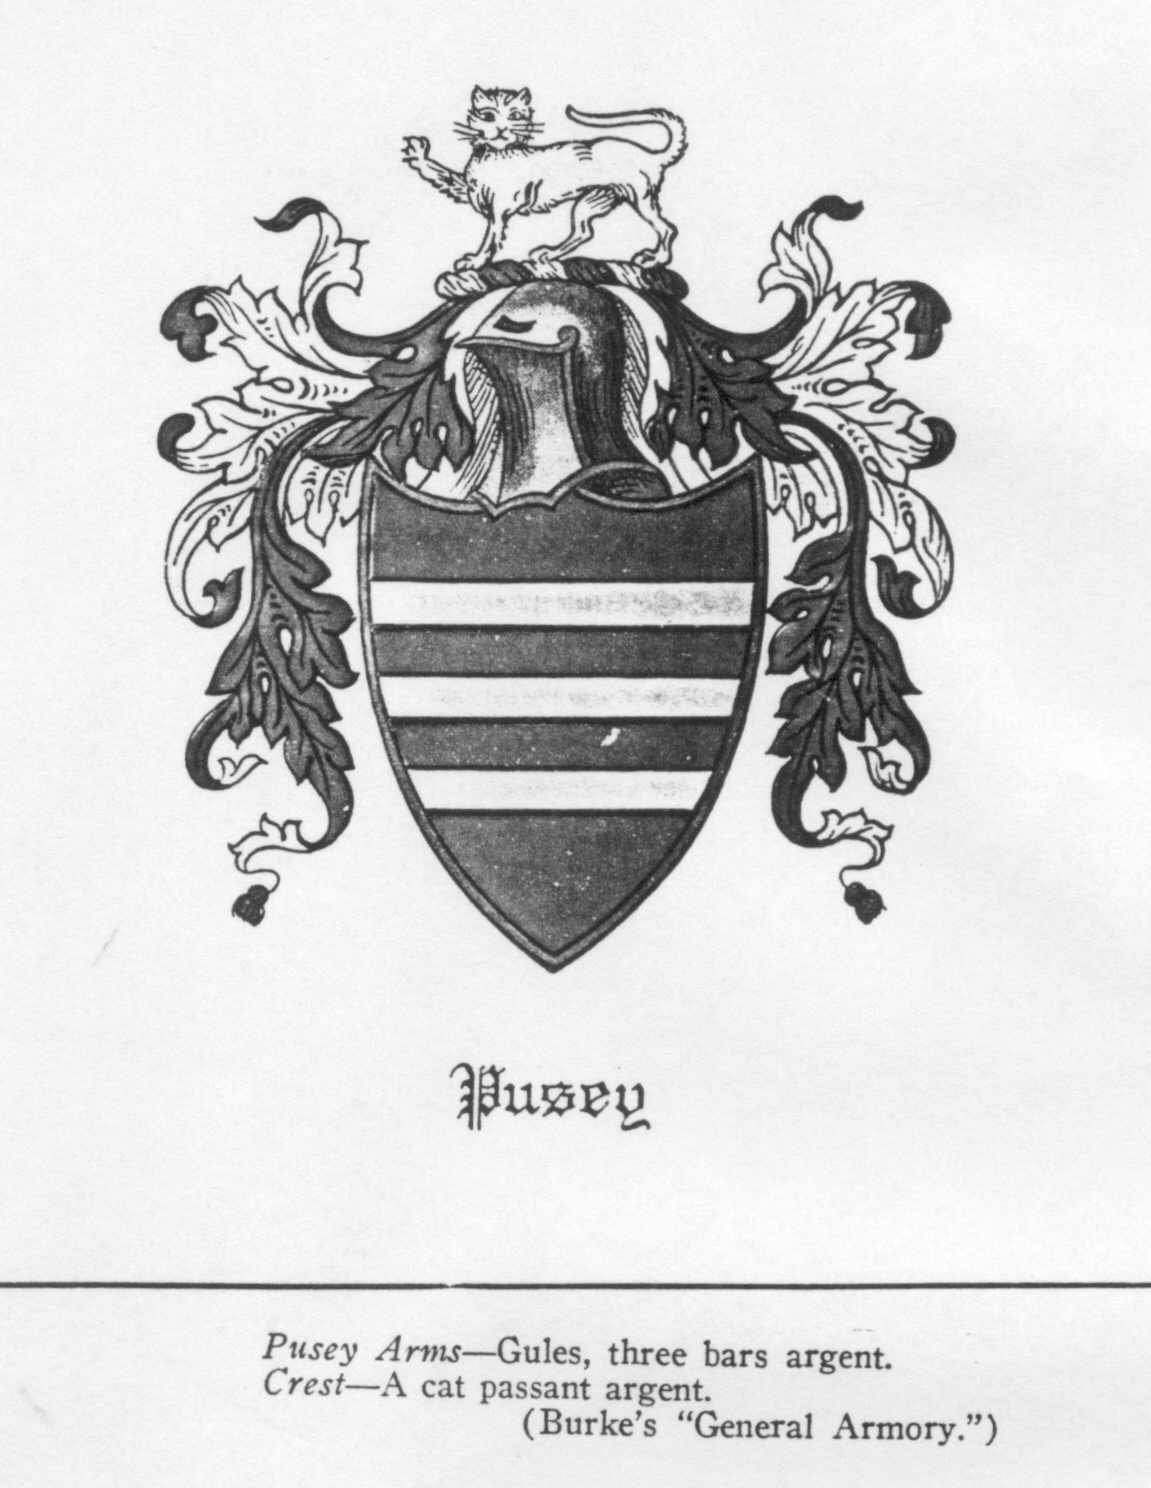 The Pusey crest